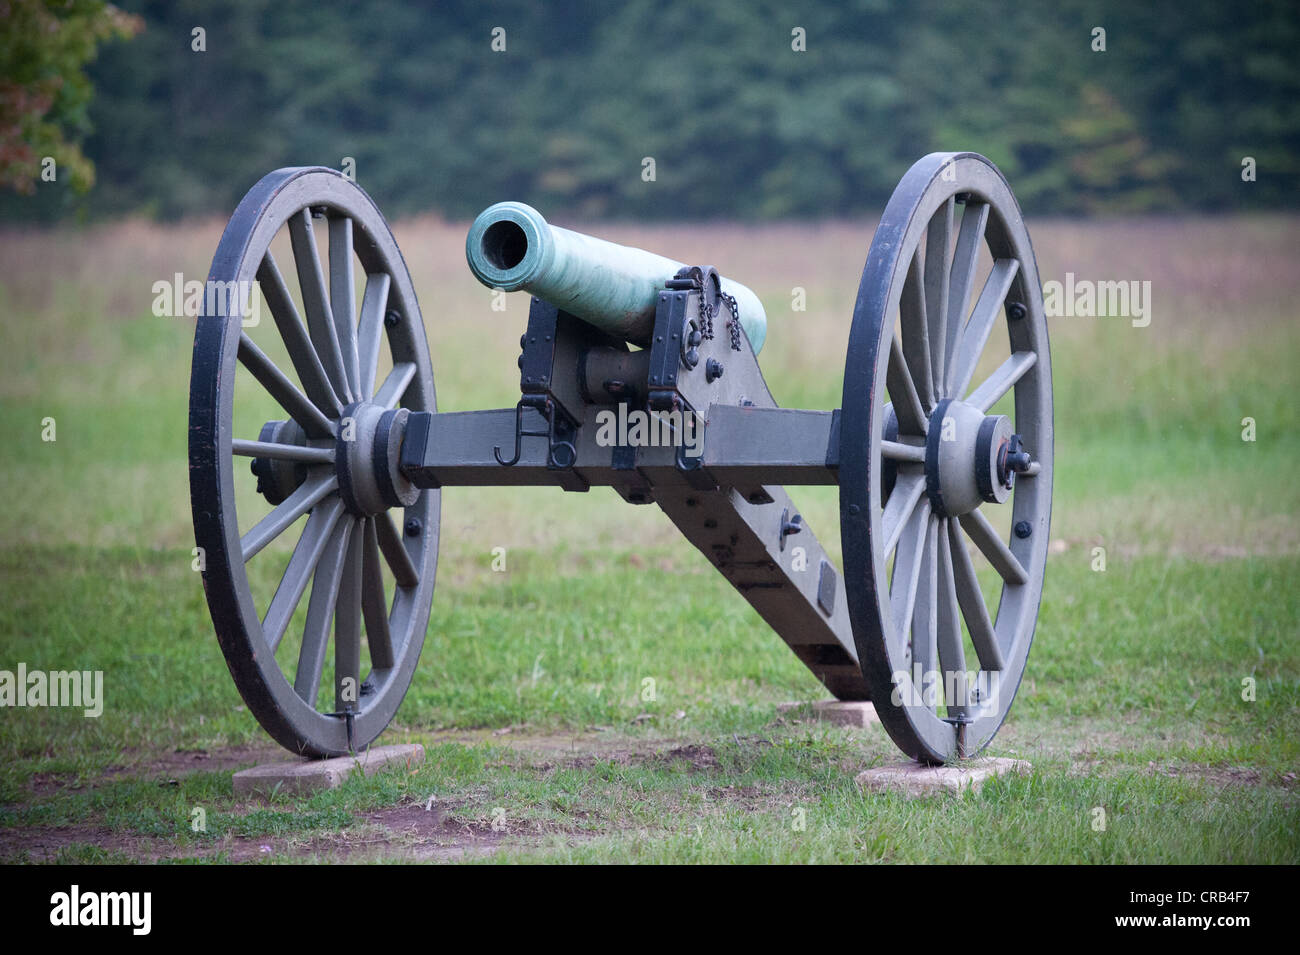 Civil War cannon situated in the wilderness Stock Photo